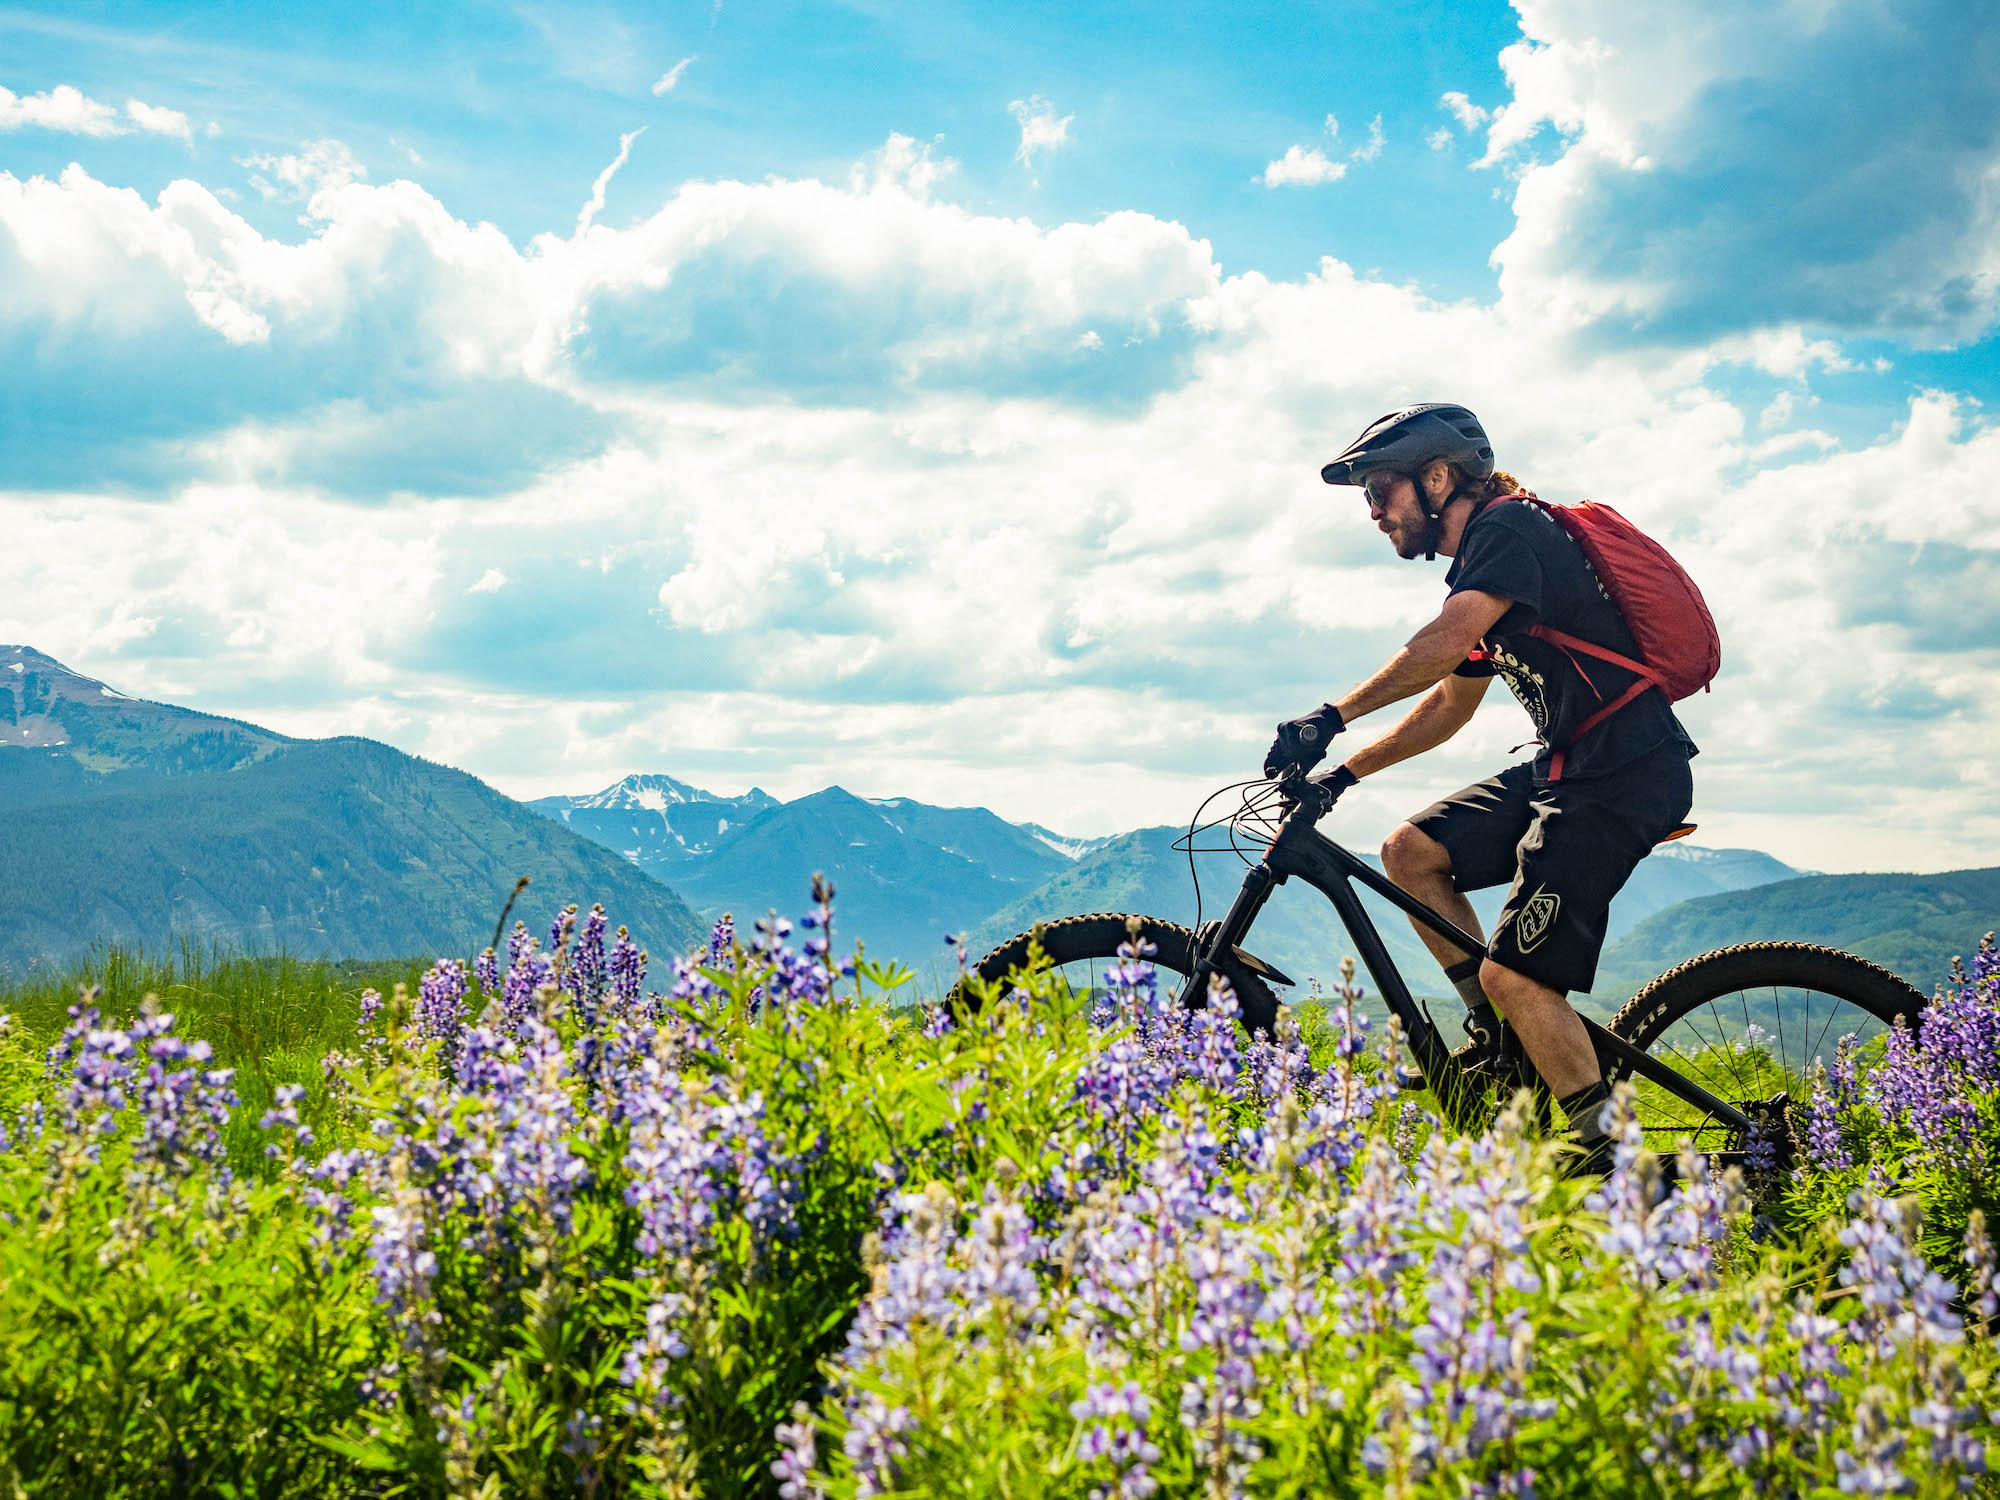 A person rides a bike in a field of wildflowers